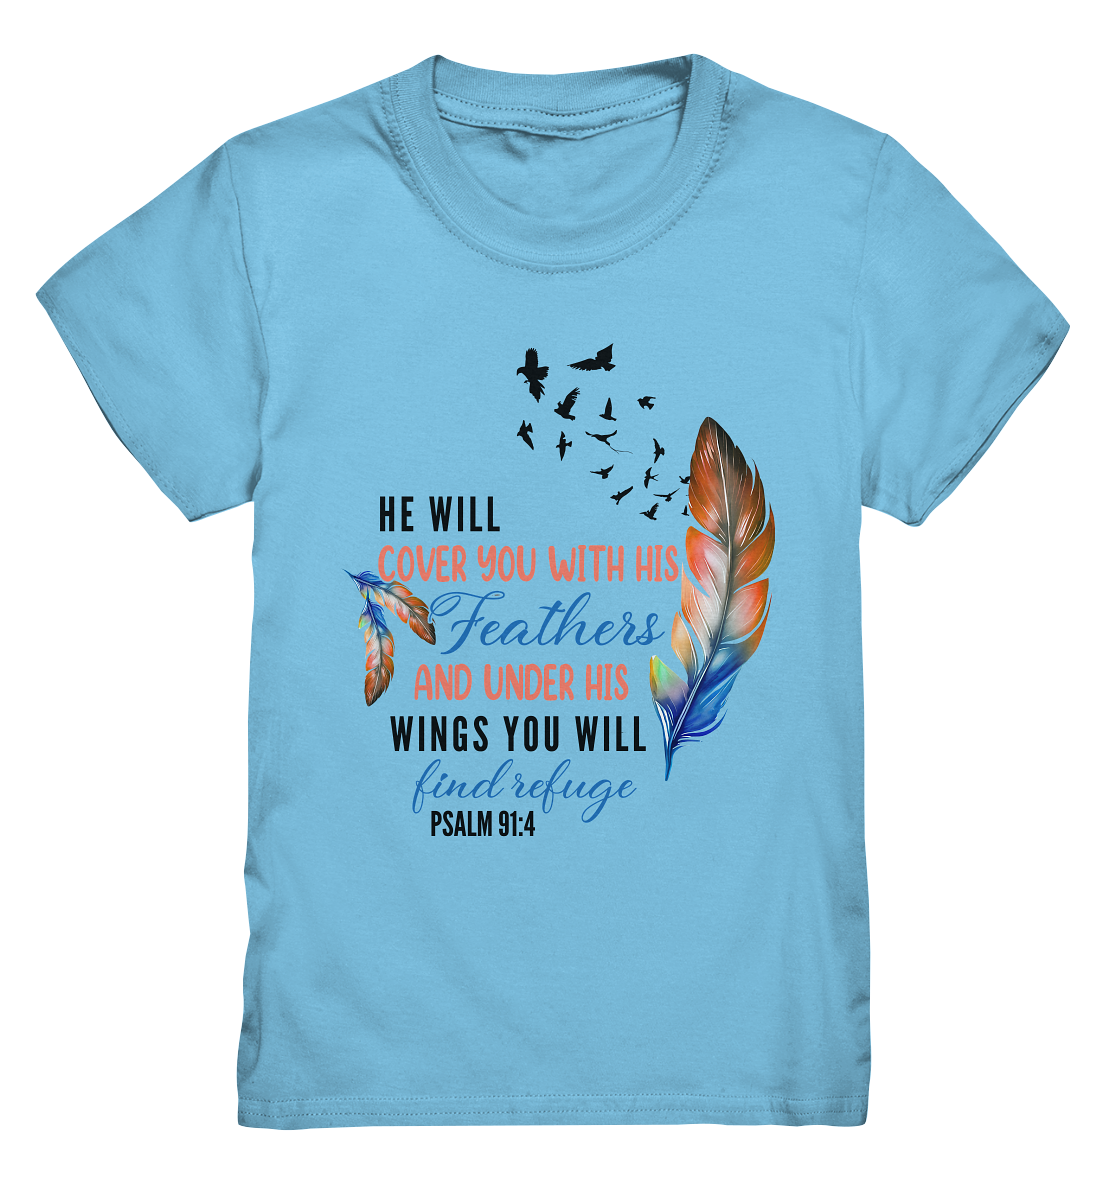 Psalm 91:4 - He will cover you with his Feathers - Kids Premium Shirt